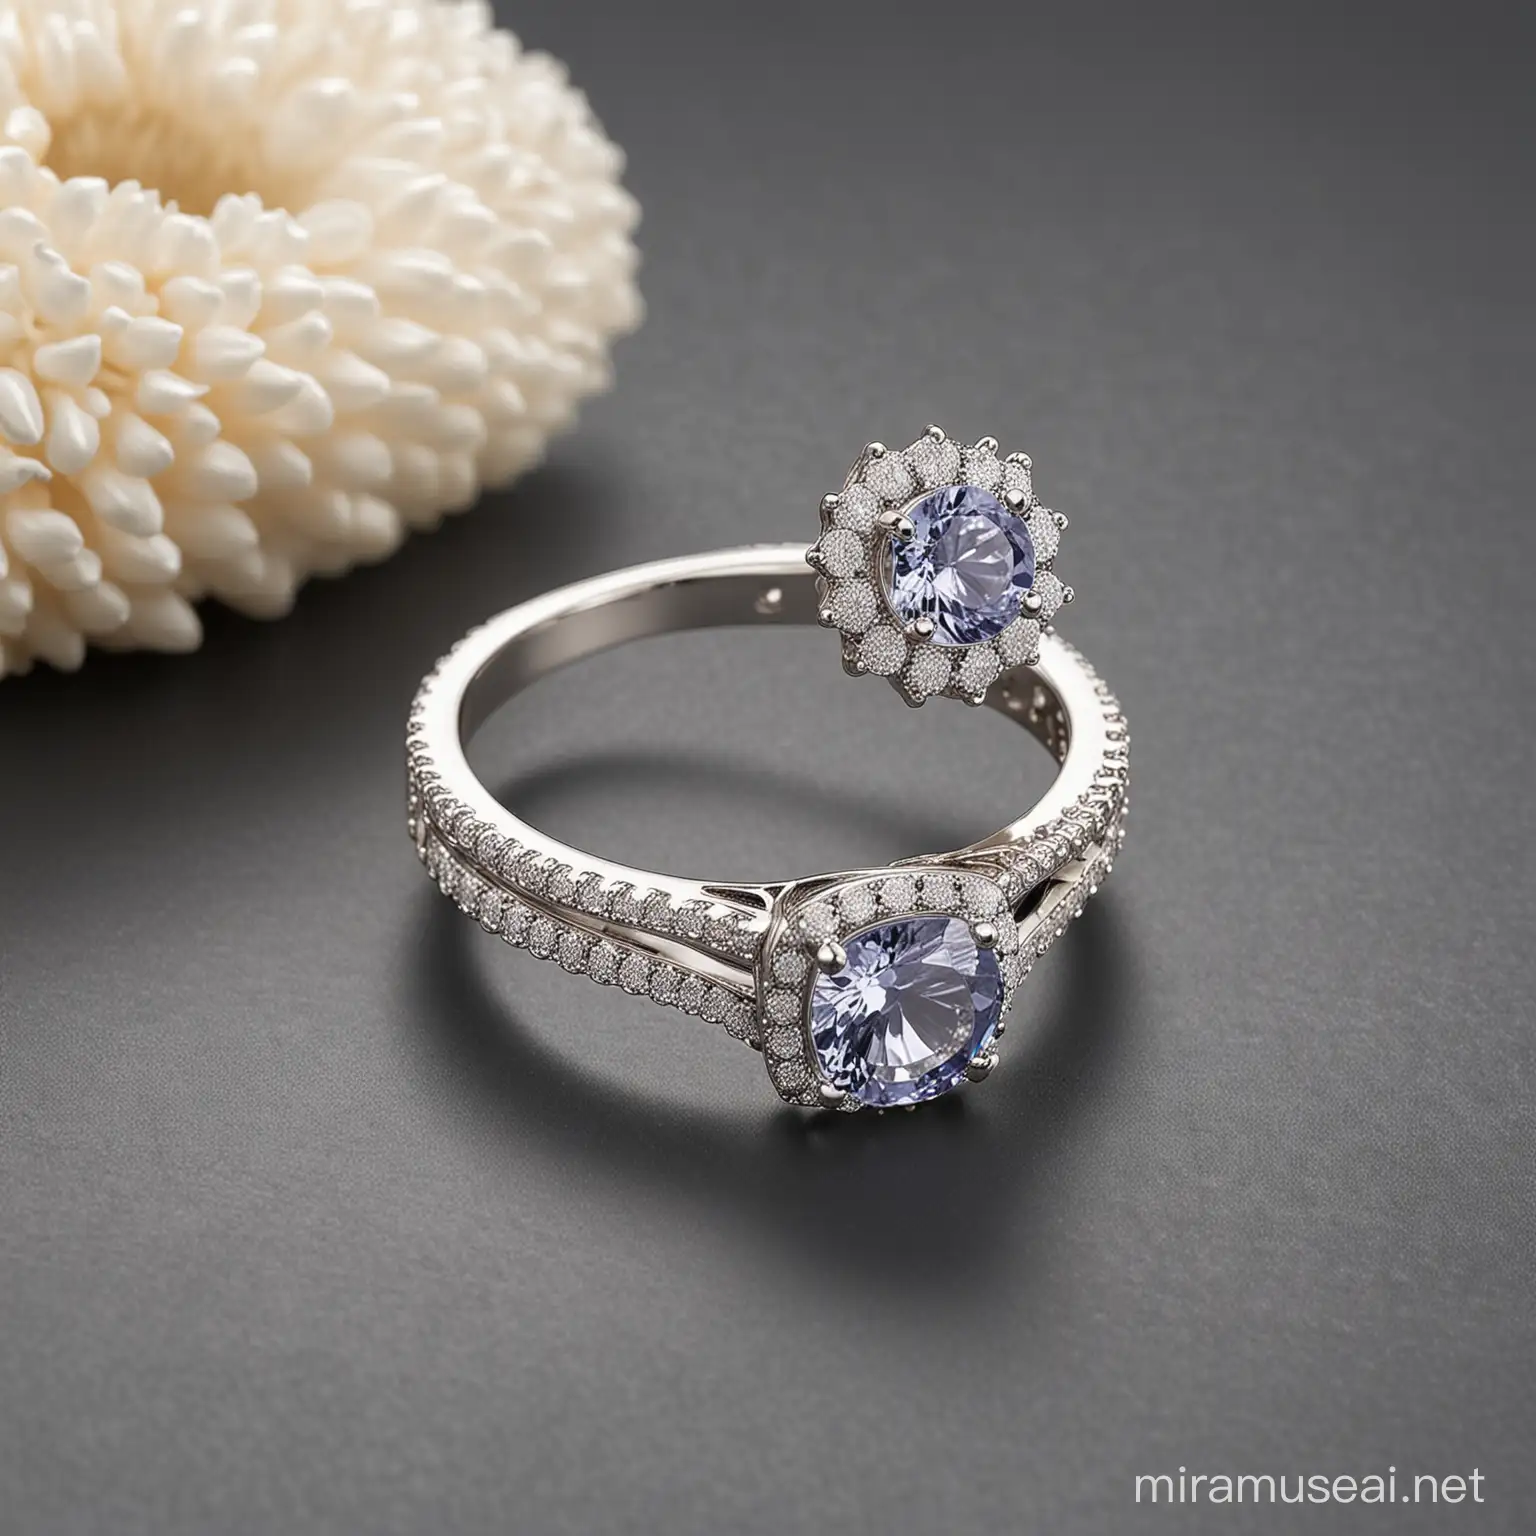 Exquisite Jewelry Product Photography with Elegant Lighting